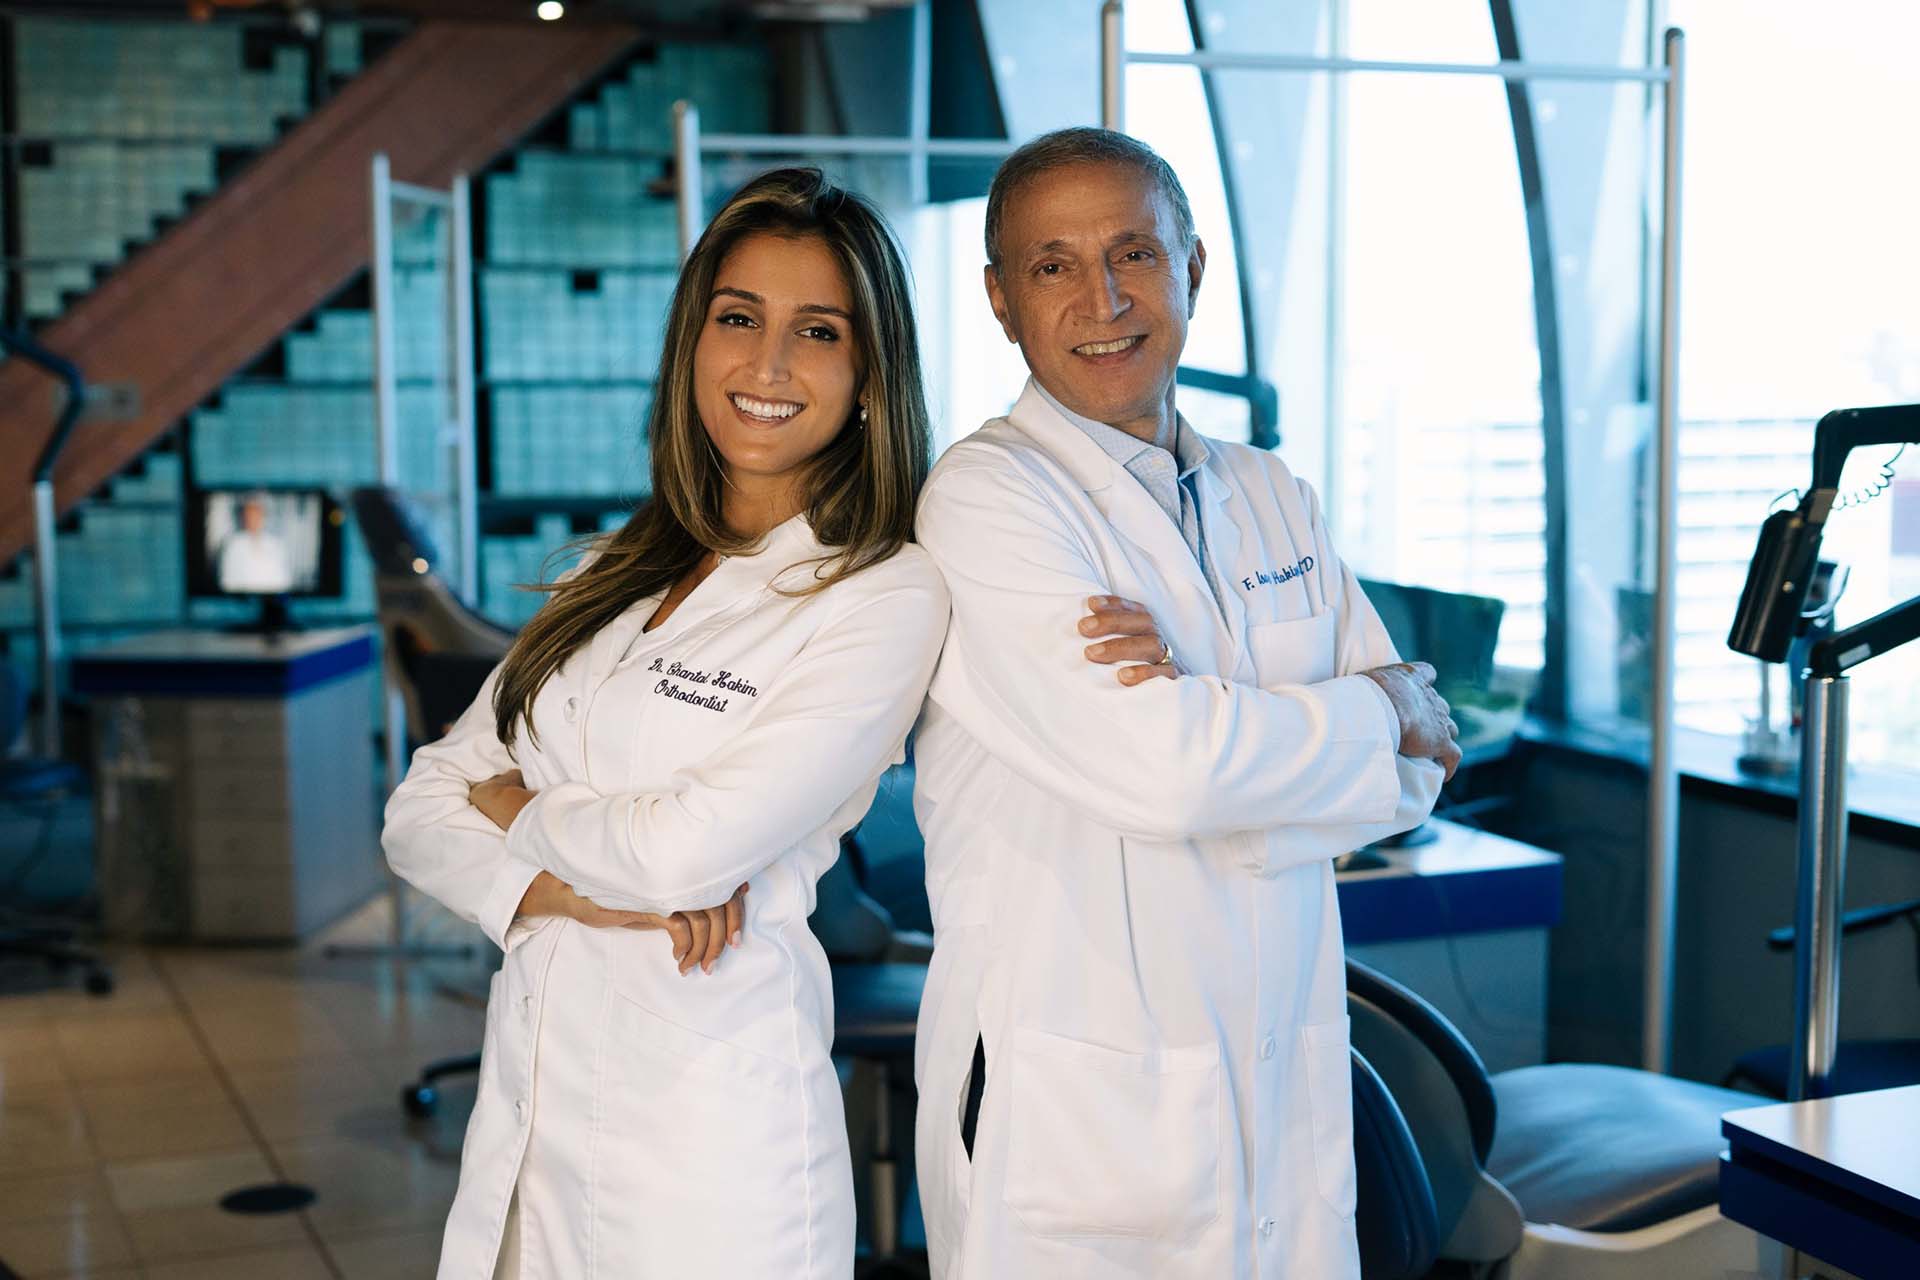 Dr. Chantal Hakim and Dr. F. Isaac Hakim at the Orthospaceship in Los Angeles, a Southern California orthodontic practice serving Beverly Grove, Los Angeles.